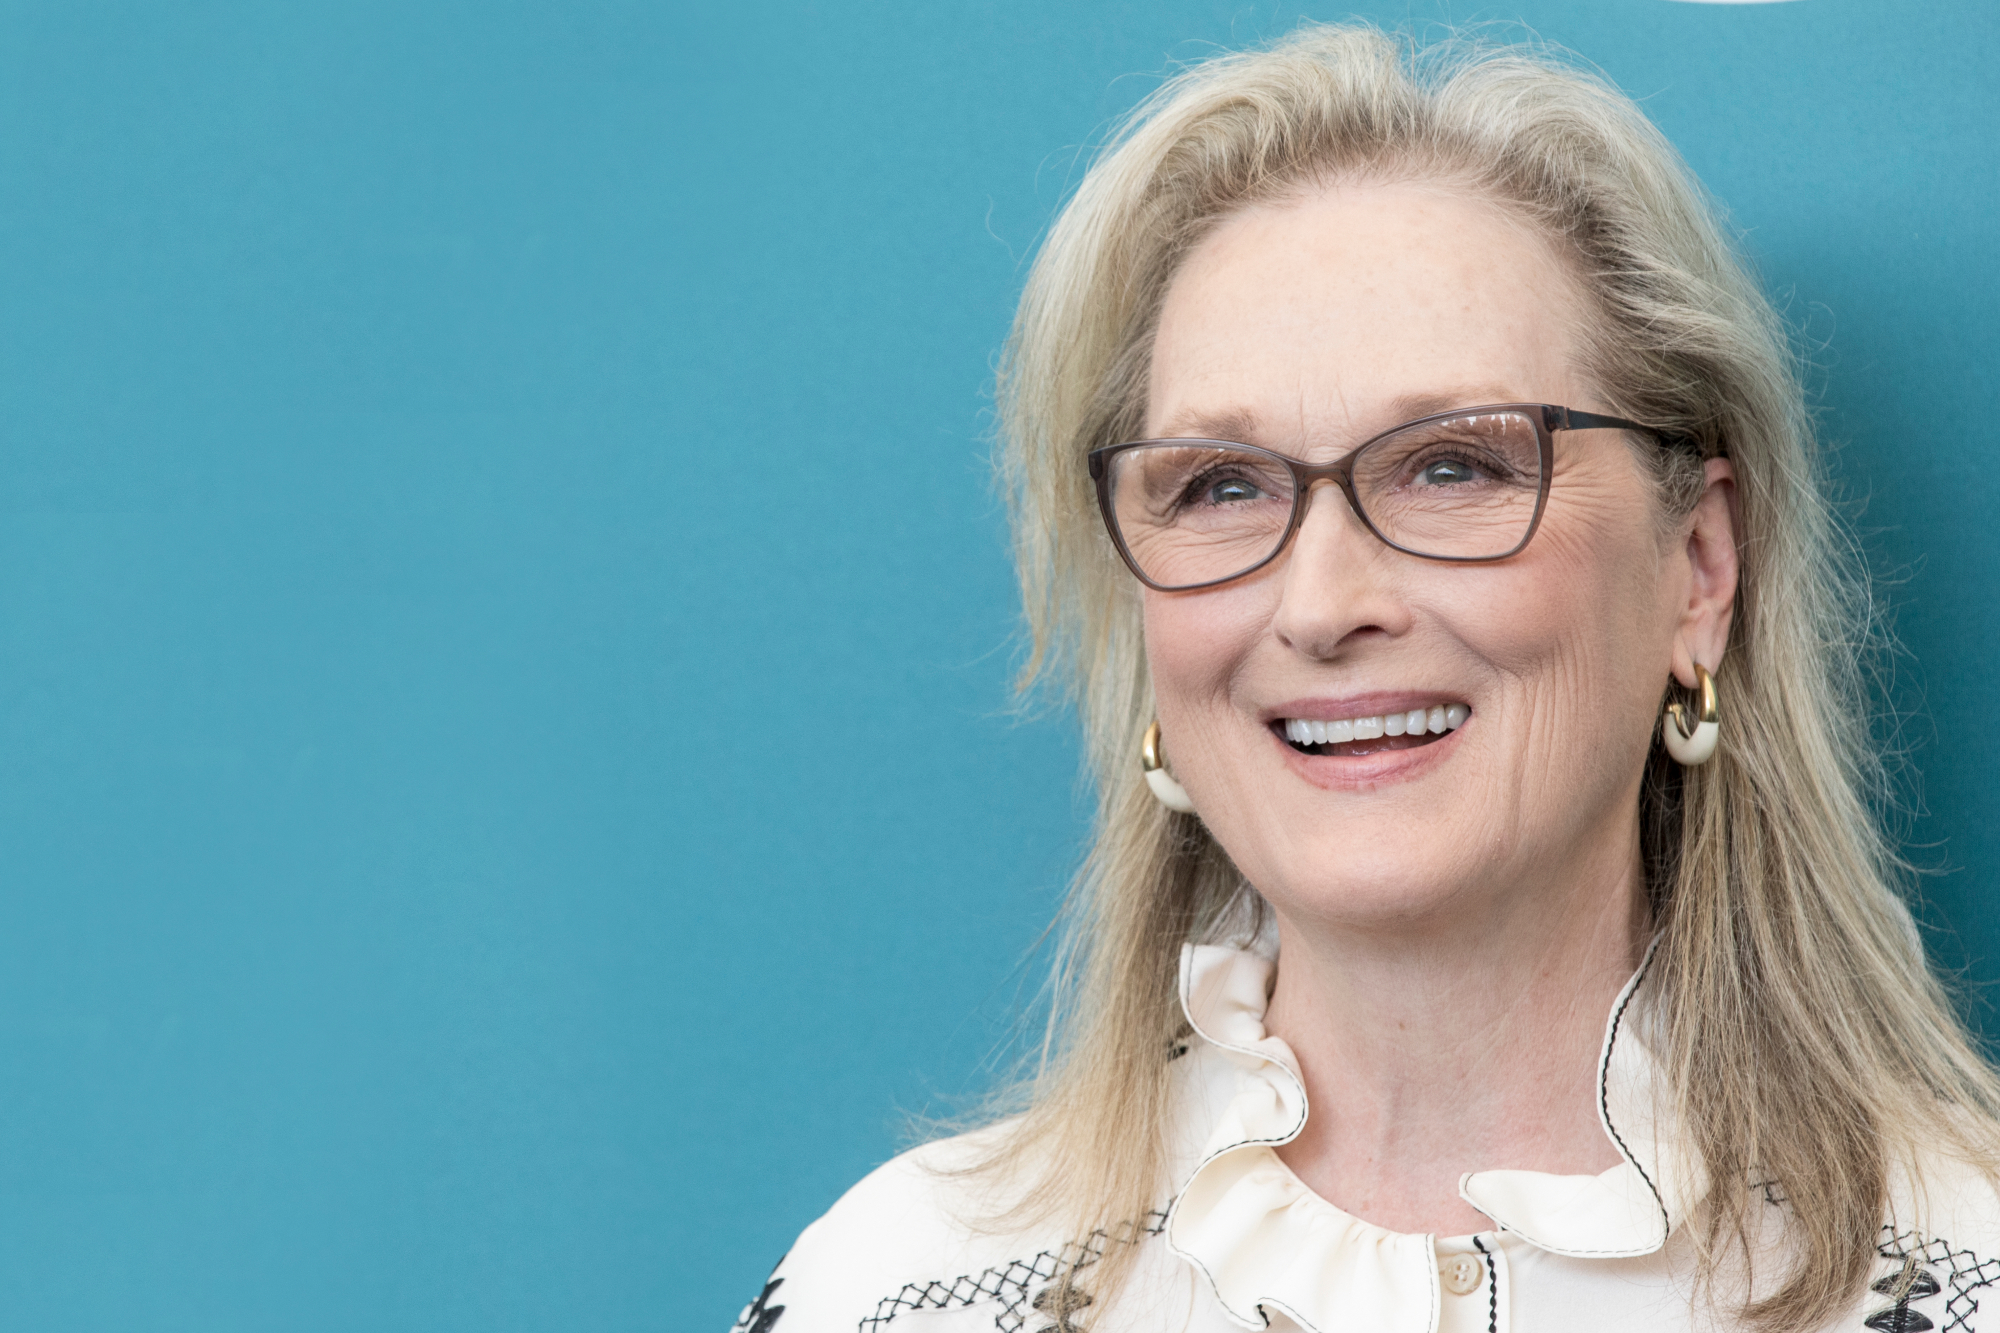 Meryl Streep, star of Woody Allen's 'Manhattan' smiling with glasses in front of blue step and repeat